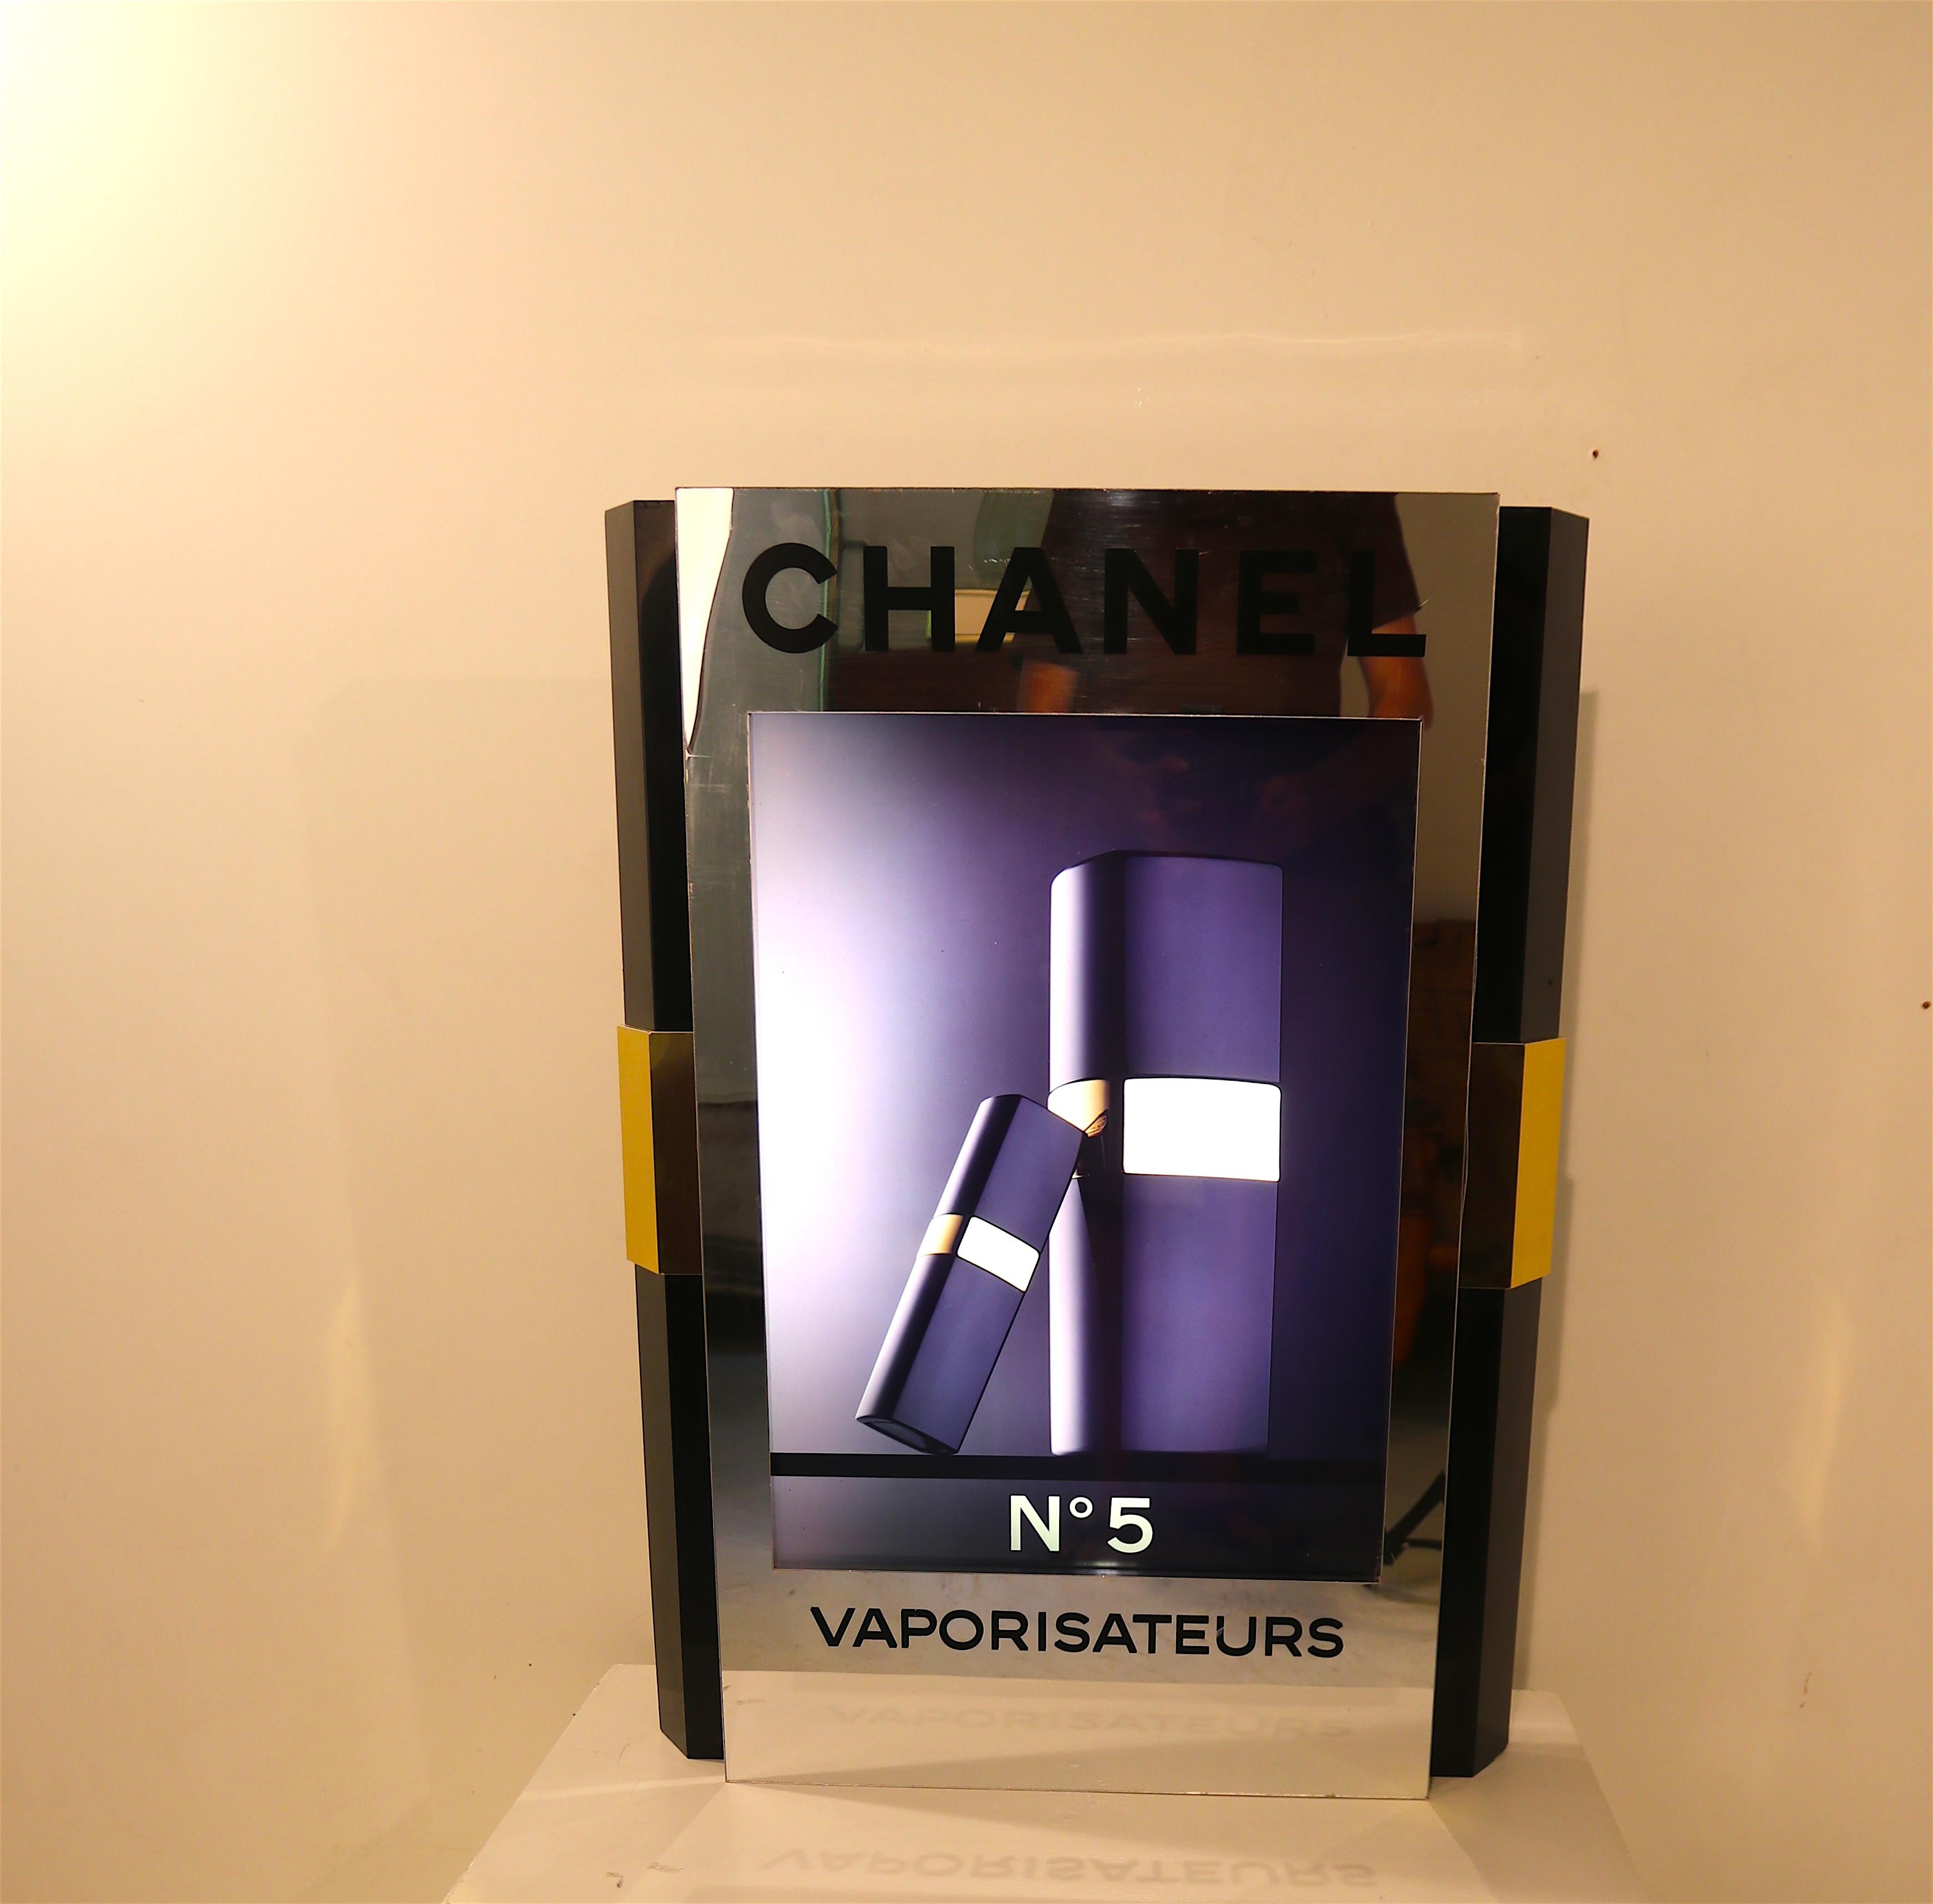 Acrylic Large Original Retail Advertisement Display with Light for Chanel No. 5